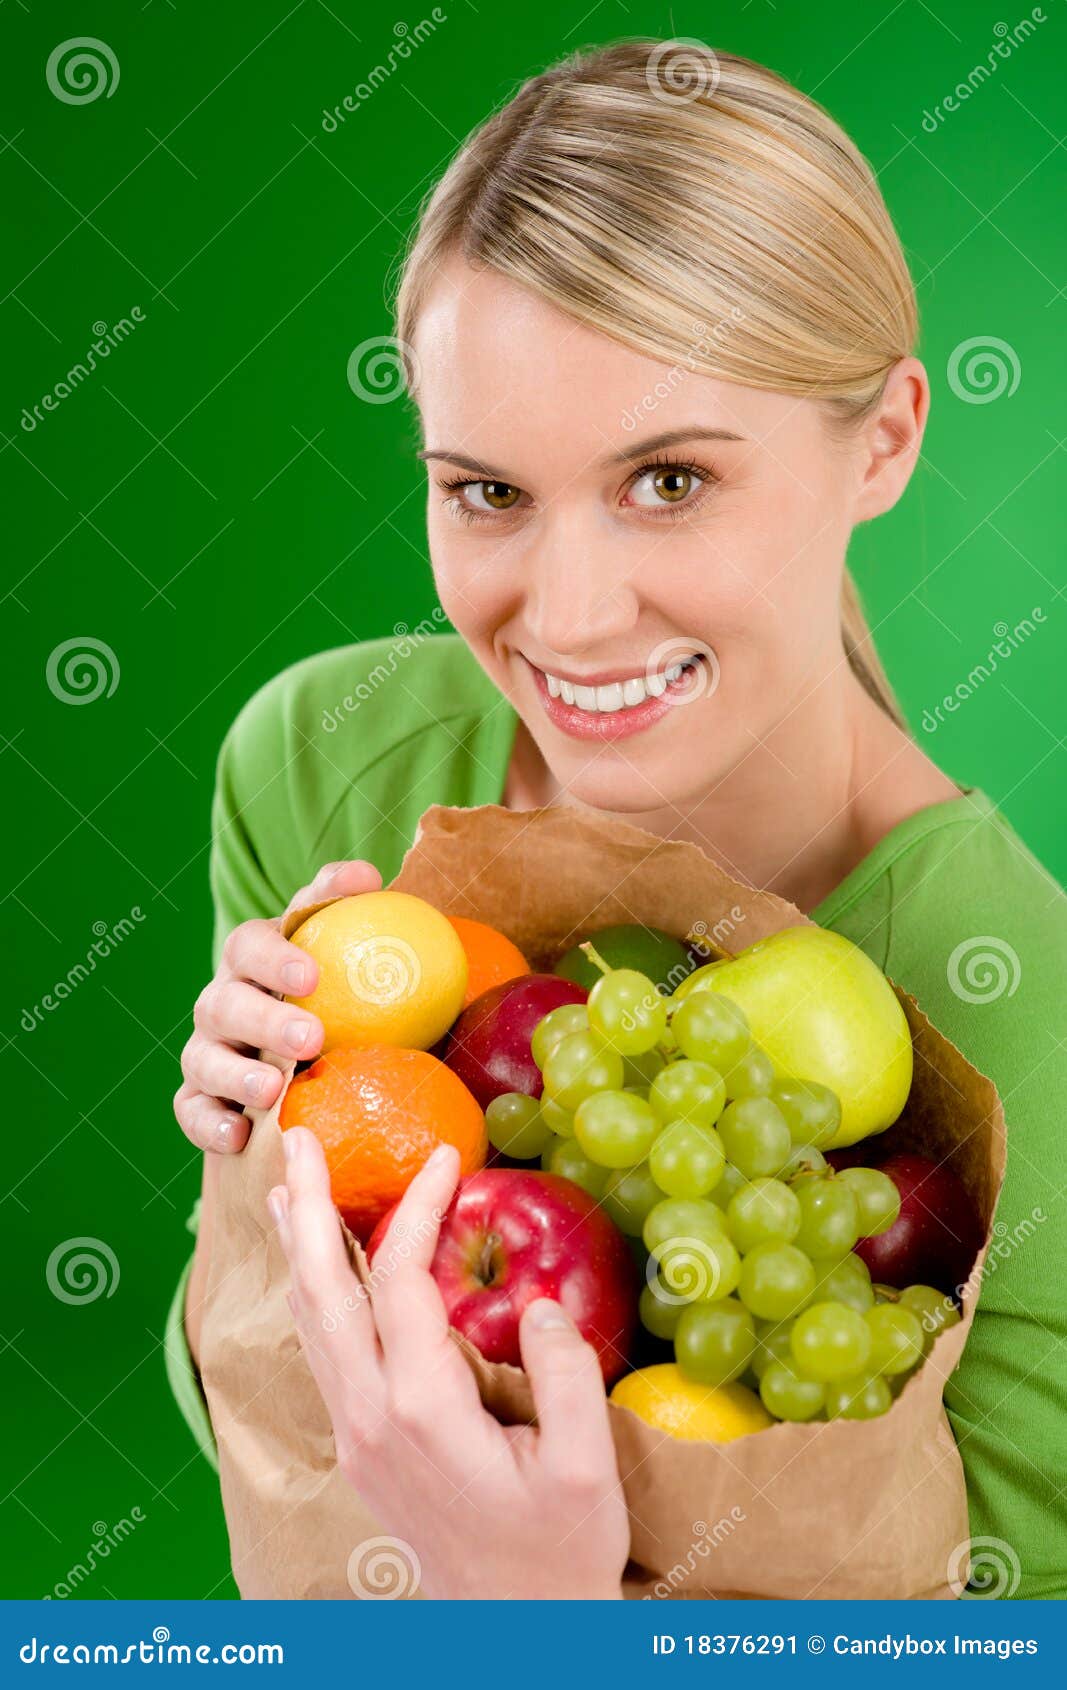 Healthy Lifestyle - Woman With Fruit In Paper Bag Stock Image - Image ...